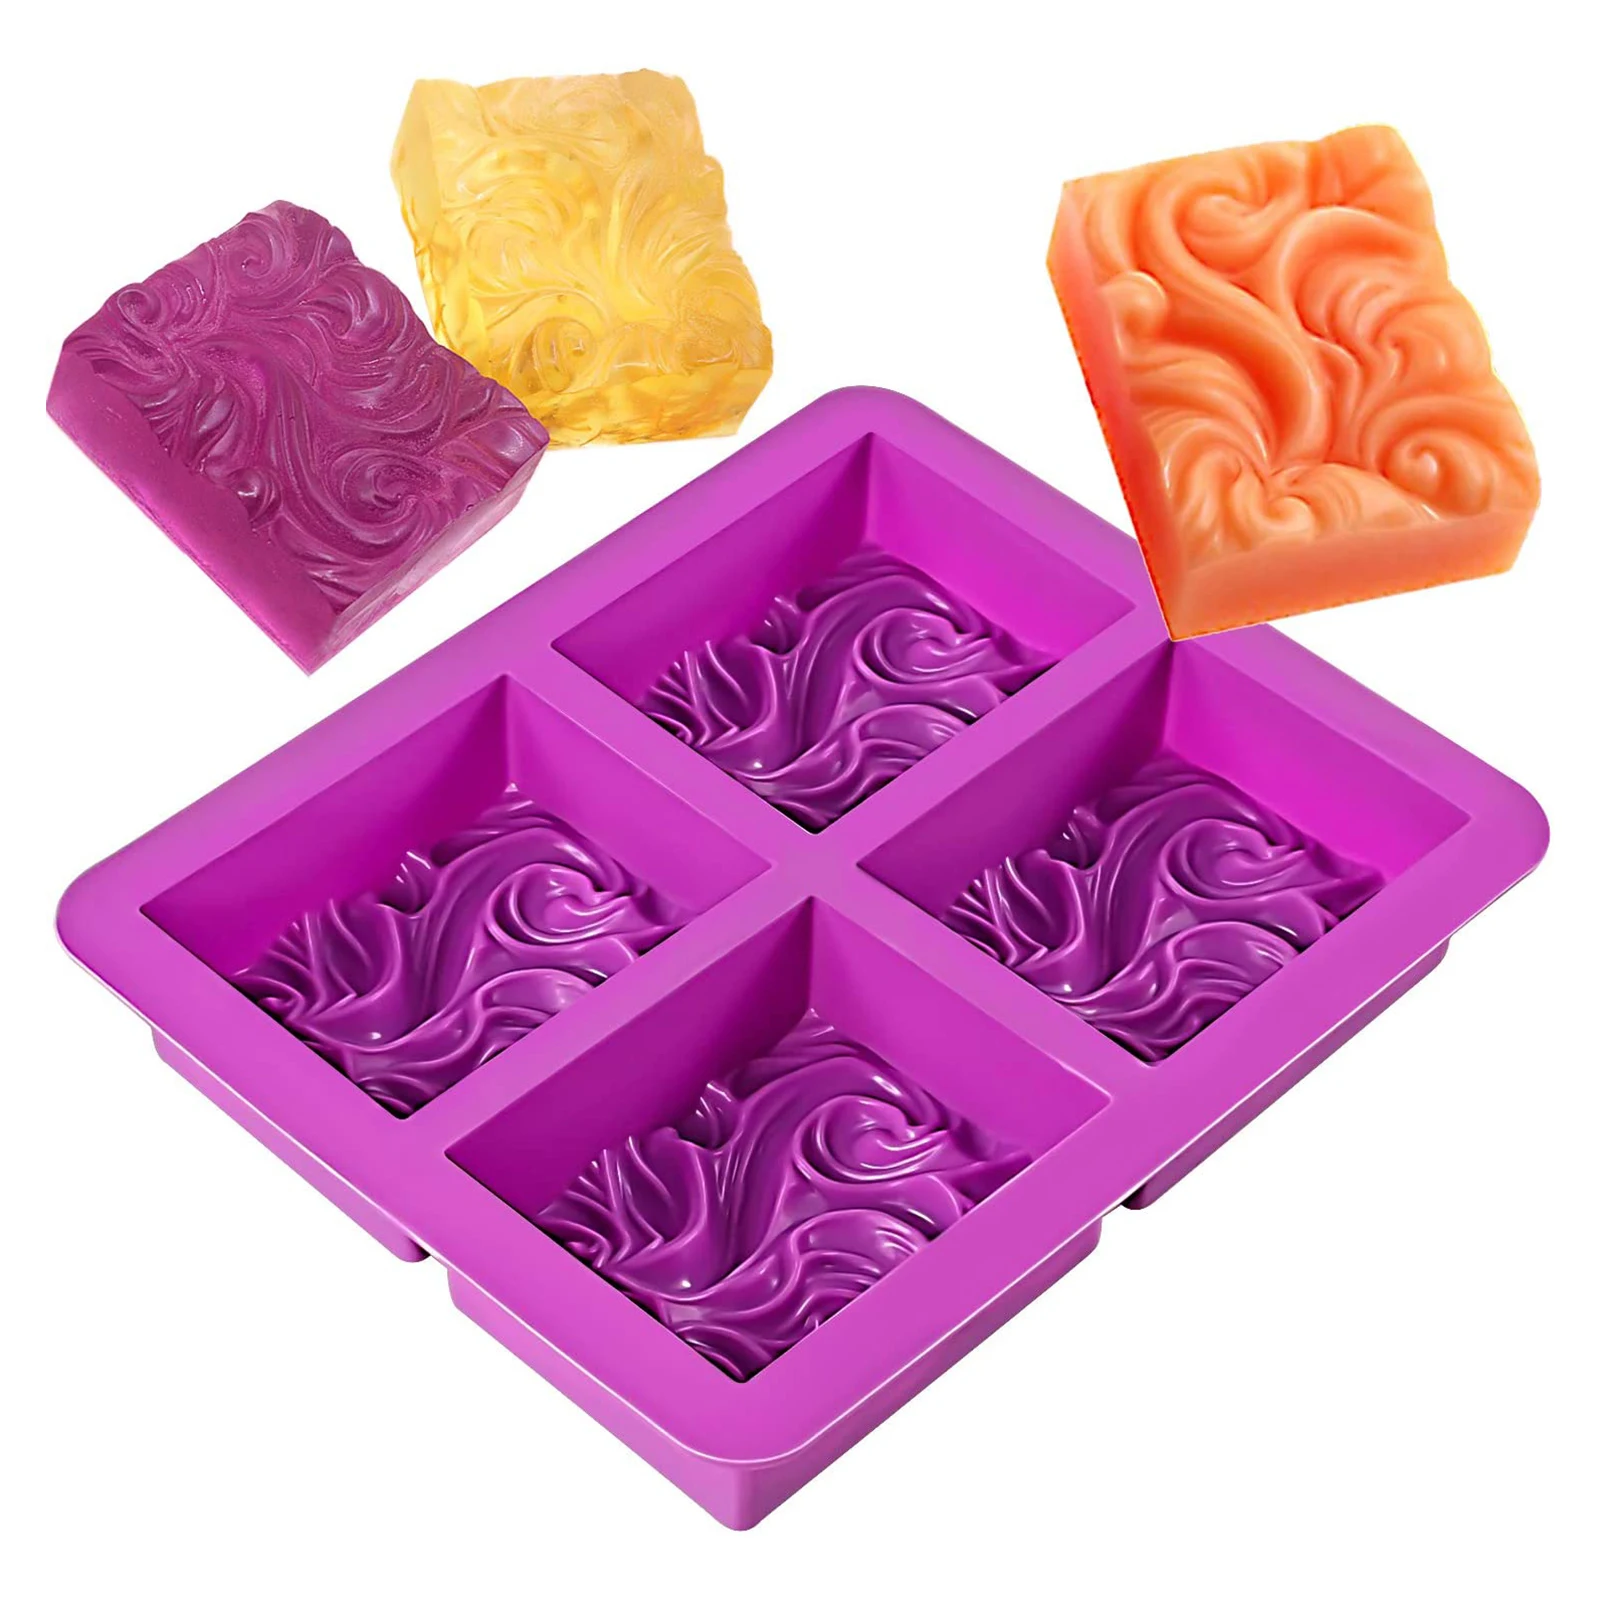 4-cavity wavy flower silicone handmade soap mold Cake mold DIY aromatherapy plaster mold essential oil soap mold